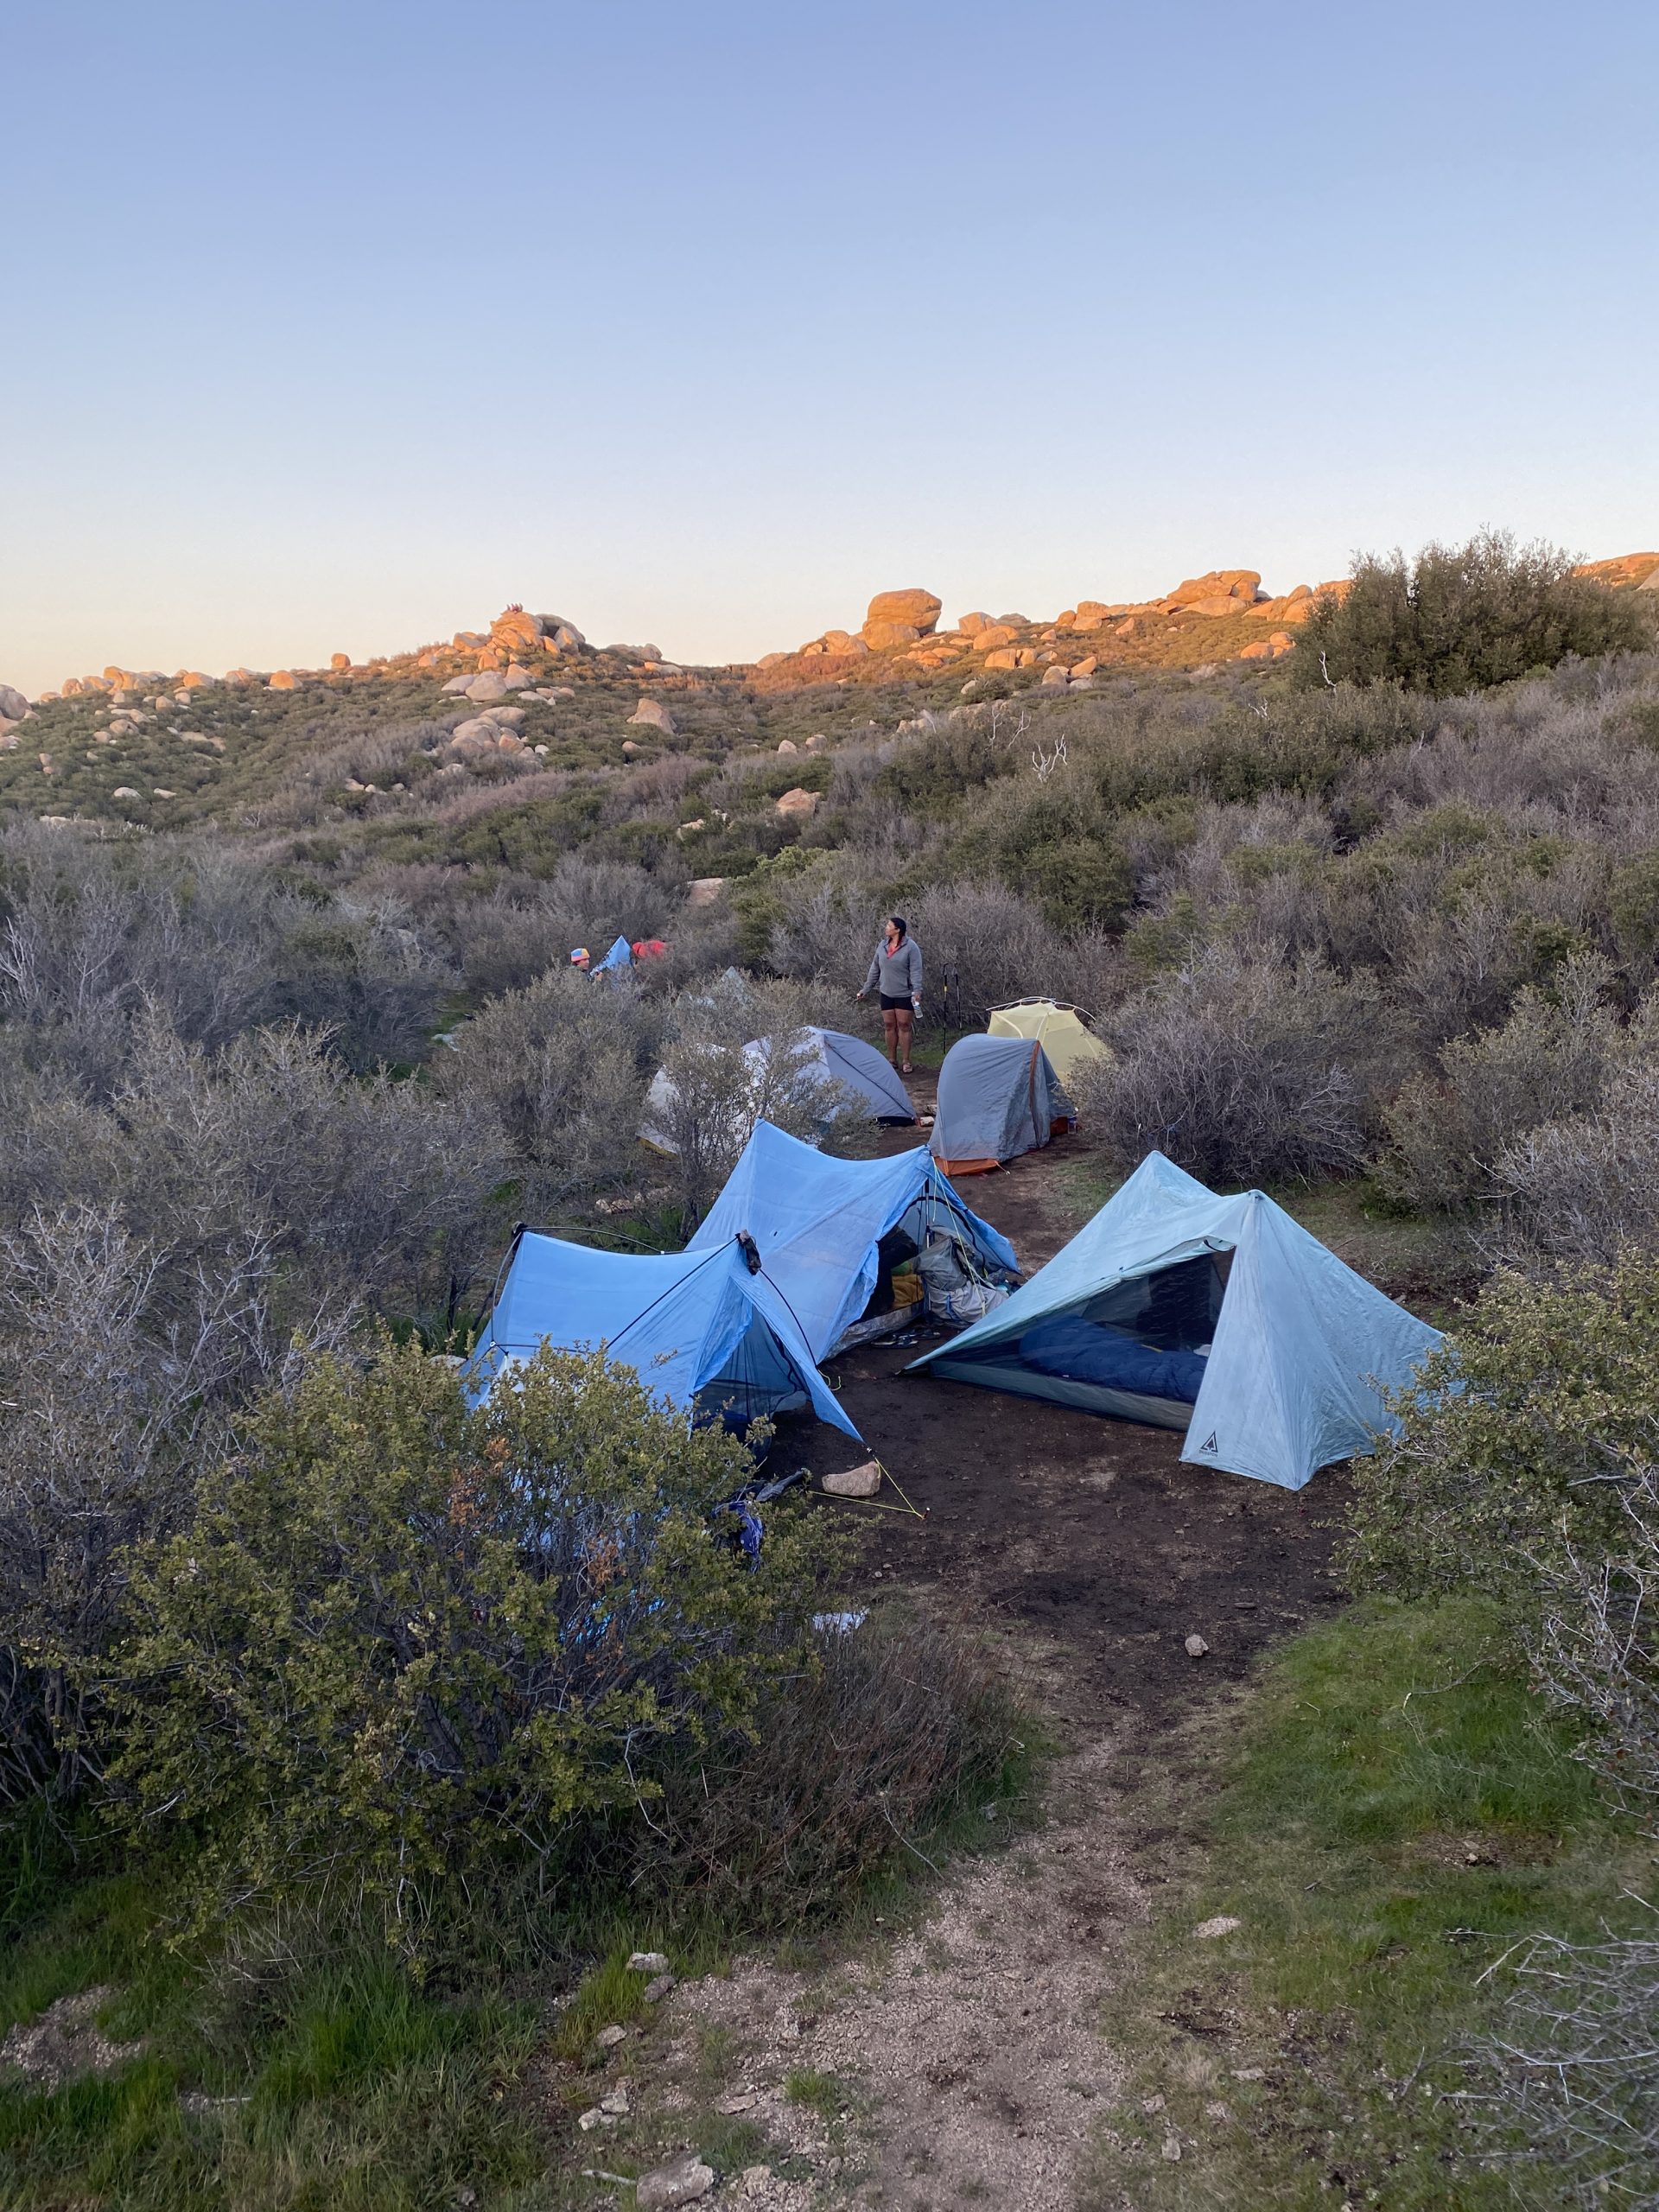 PCT tent city at mile 56.2